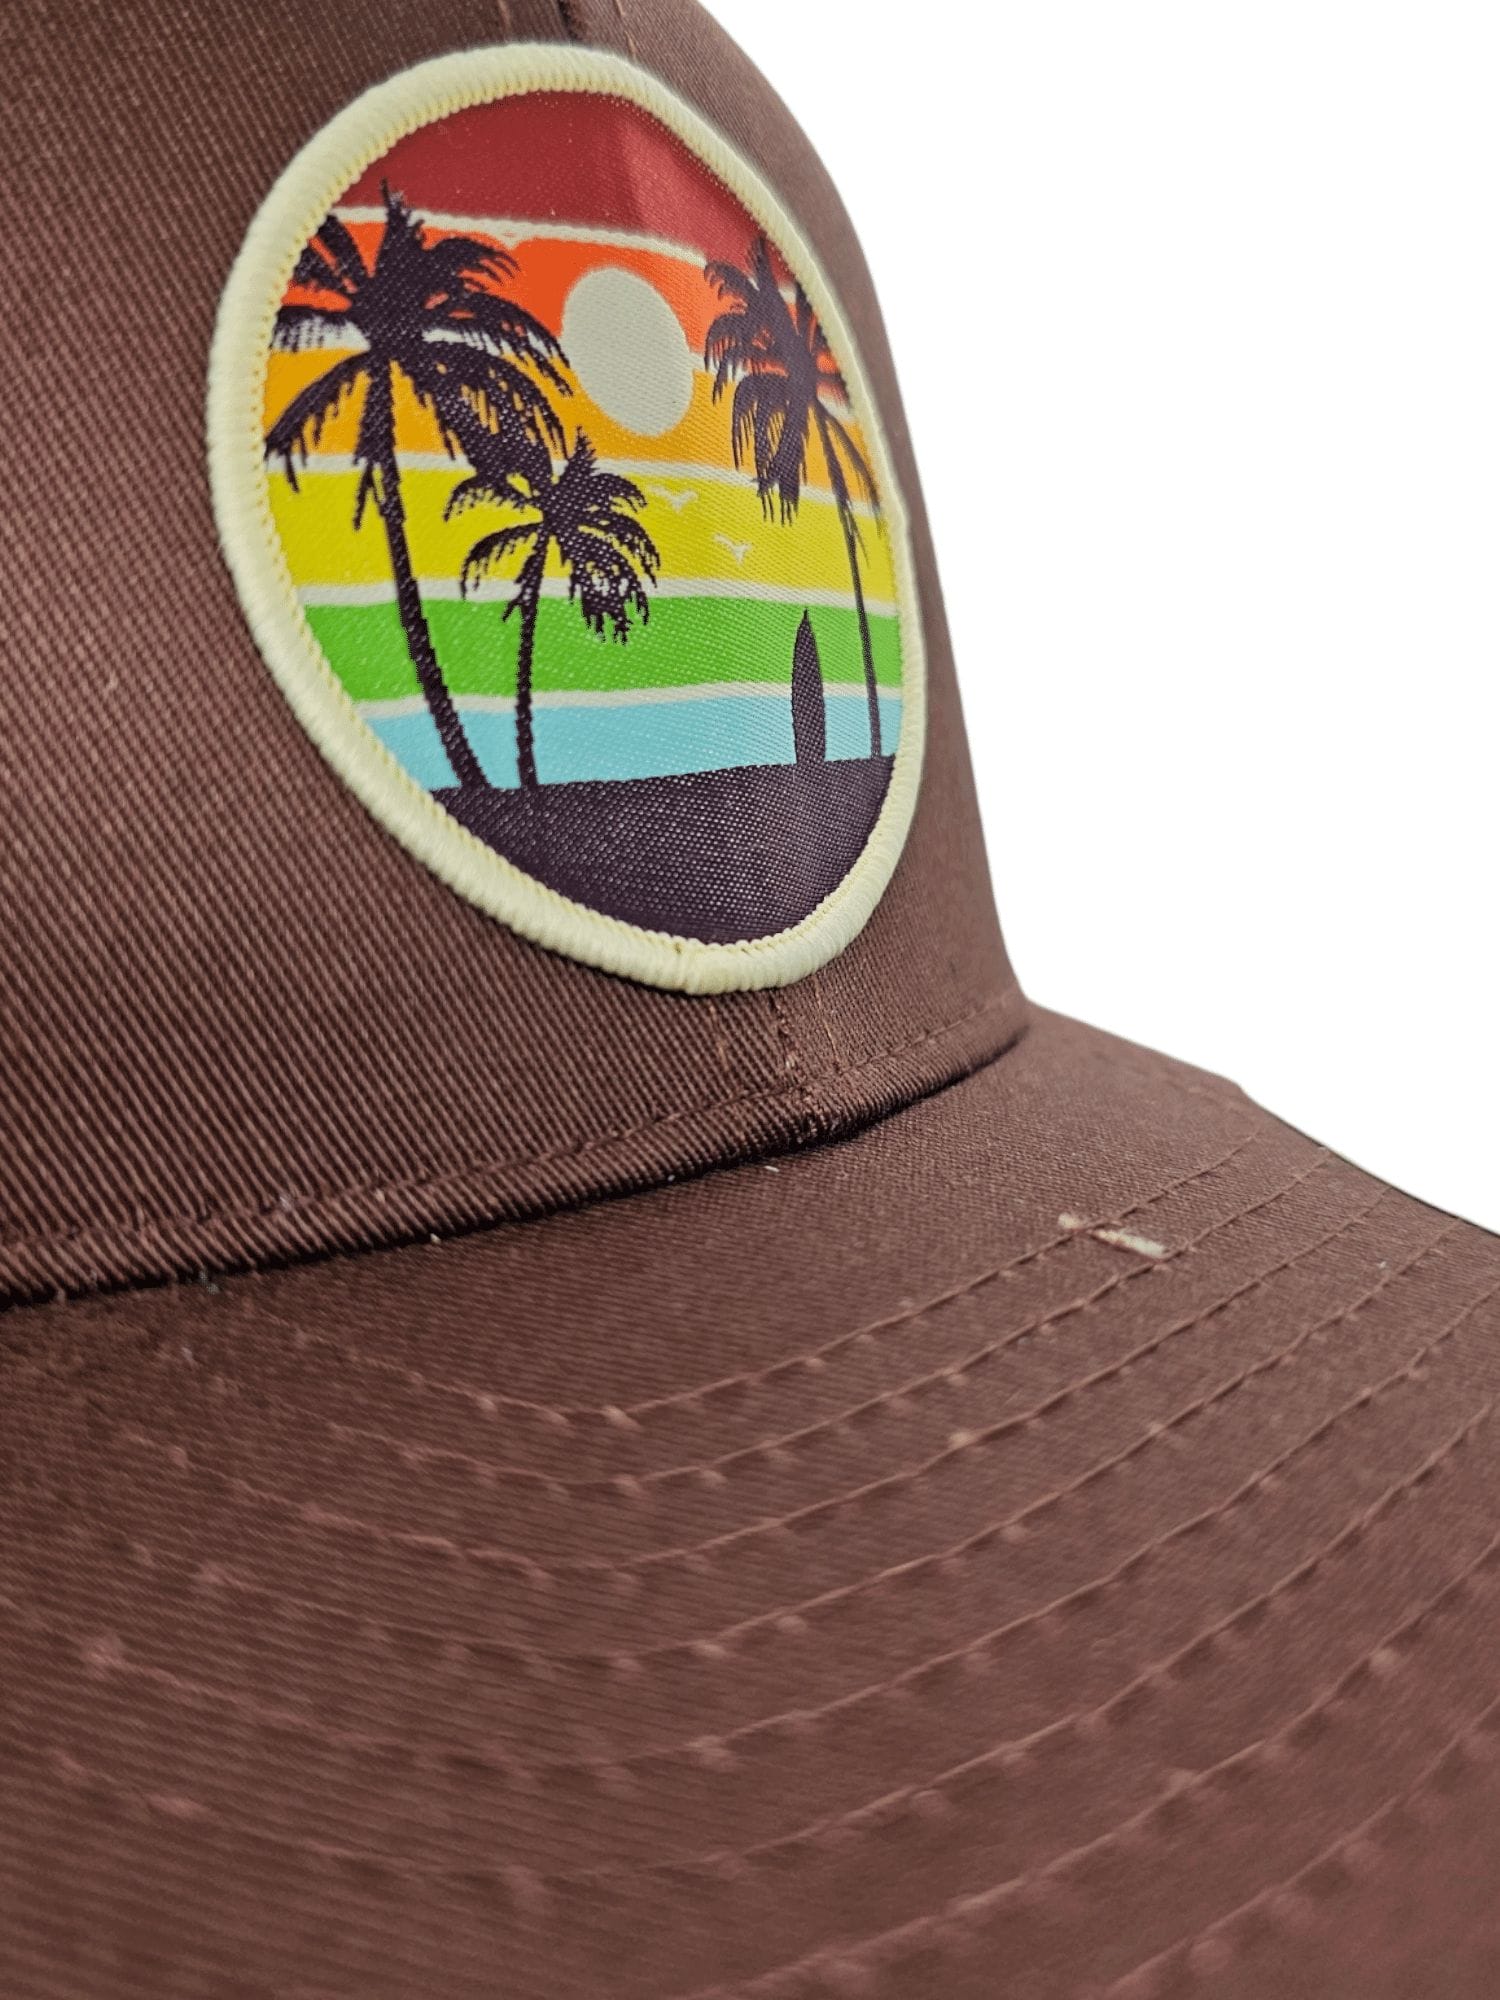 Snapback Hat with Tropical Sunset Palm Tree Design - PNW Apparel